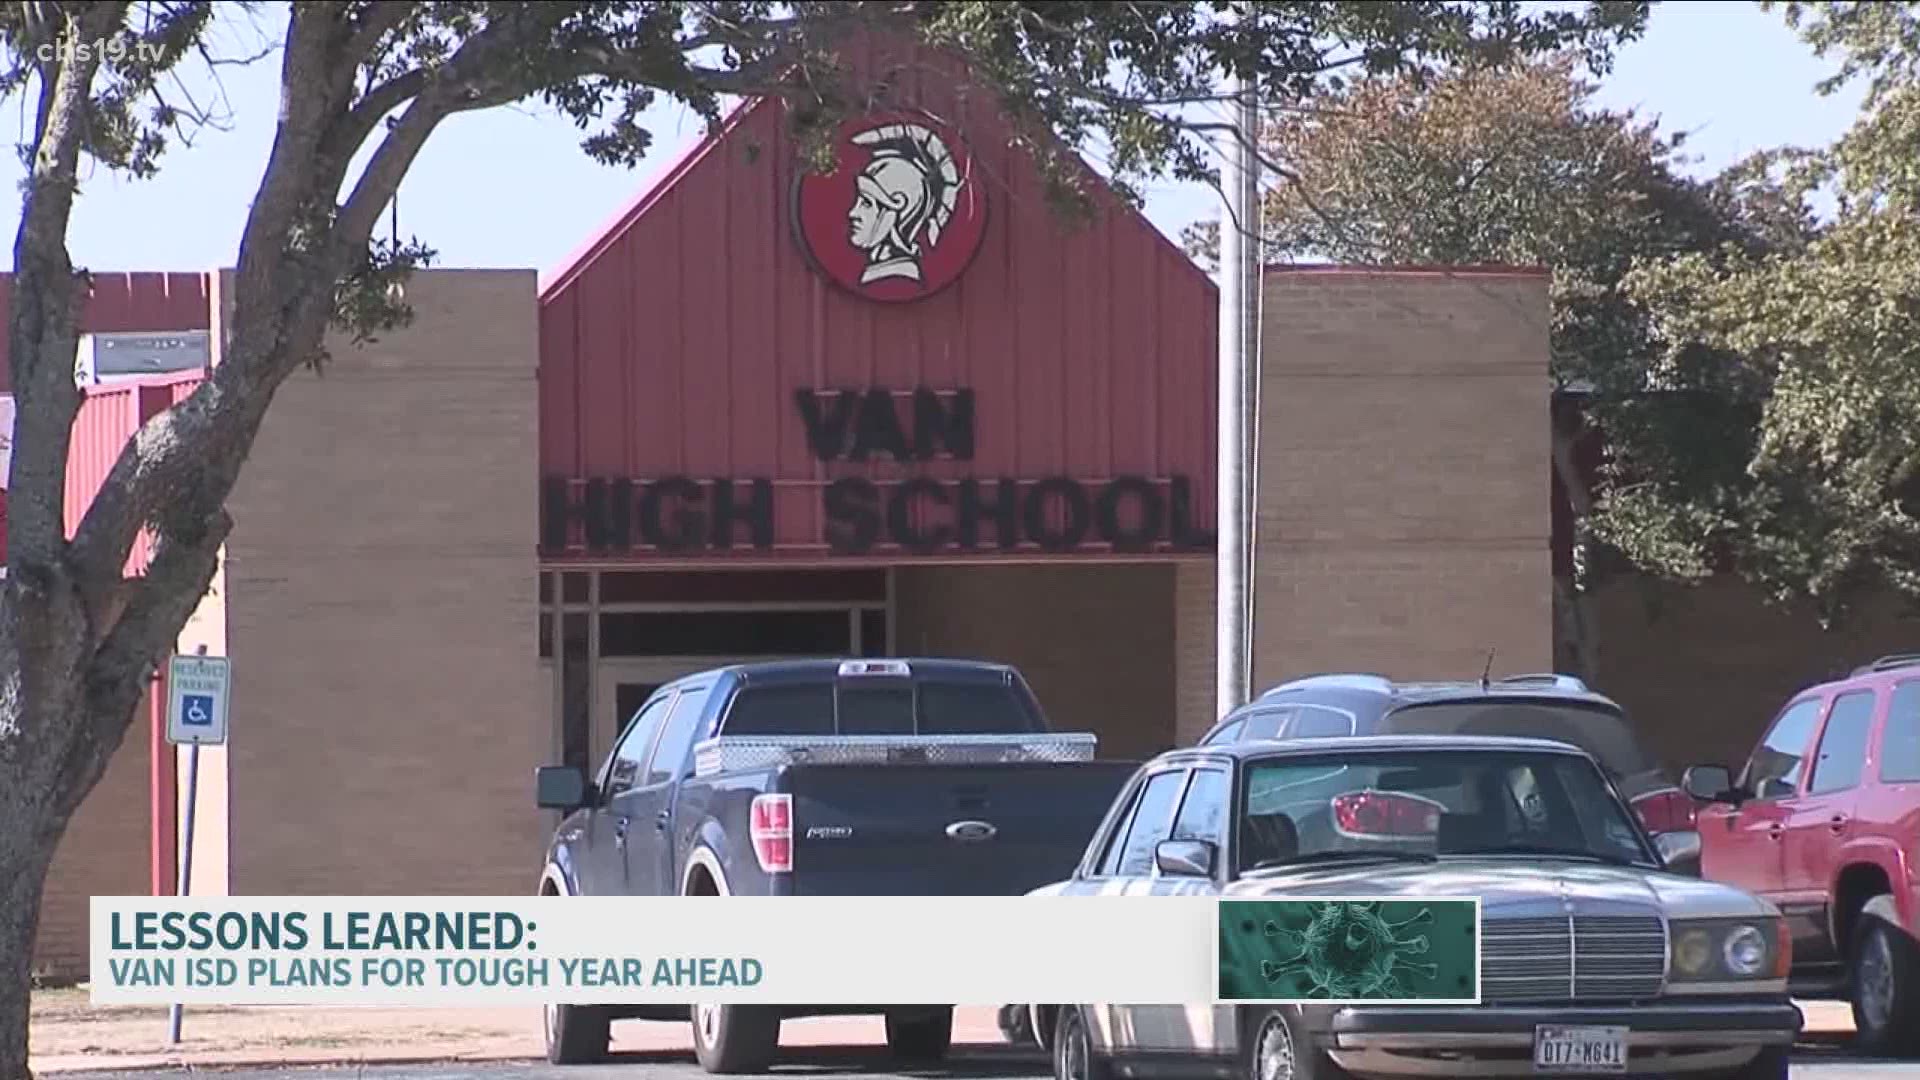 Many East Texas districts started school on time, but Van ISD pushed school back a couple weeks. It was a thoughtful, strategic decision, but did it help?